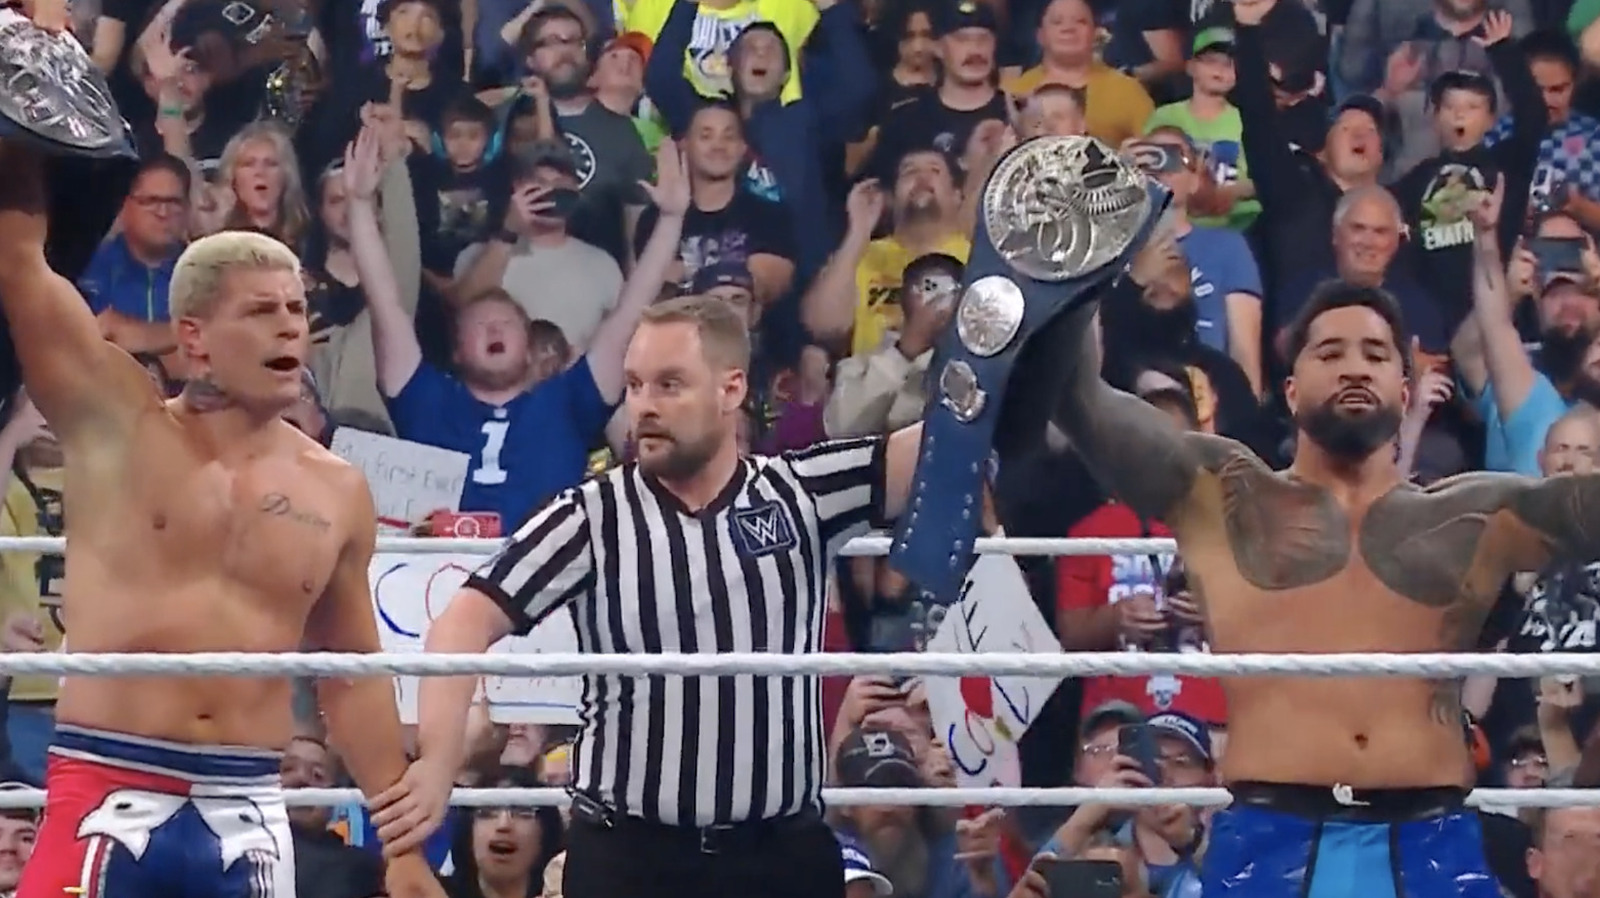 Cody Rhodes And Jey Uso Defeat The Judgment Day, Win Tag Team Titles At WWE Fastlane